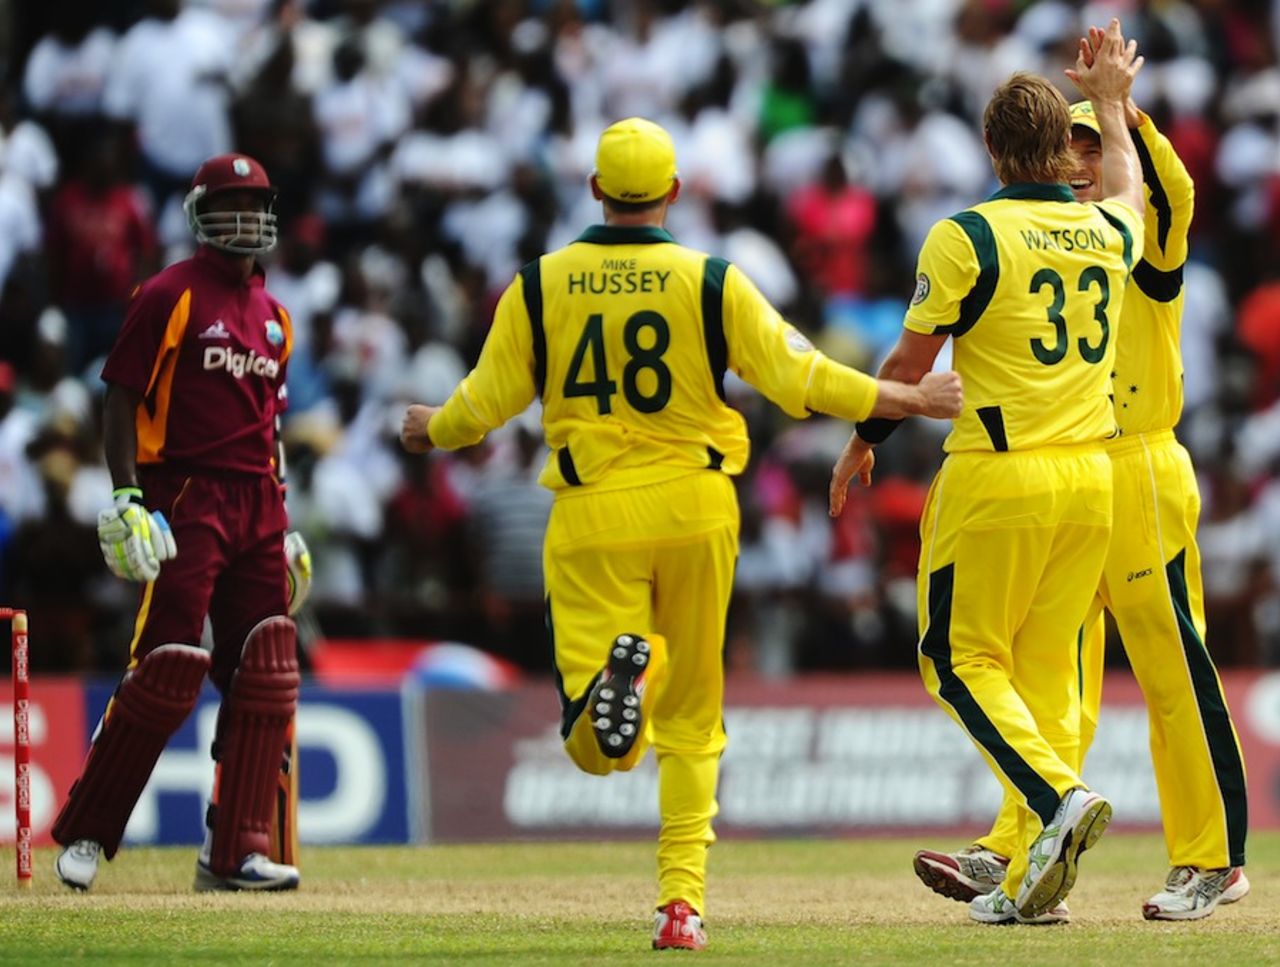 Shane Watson celebrates after trapping Marlon Samuels lbw, West Indies v Australia, 3rd ODI, St Vincent, March 20, 2012